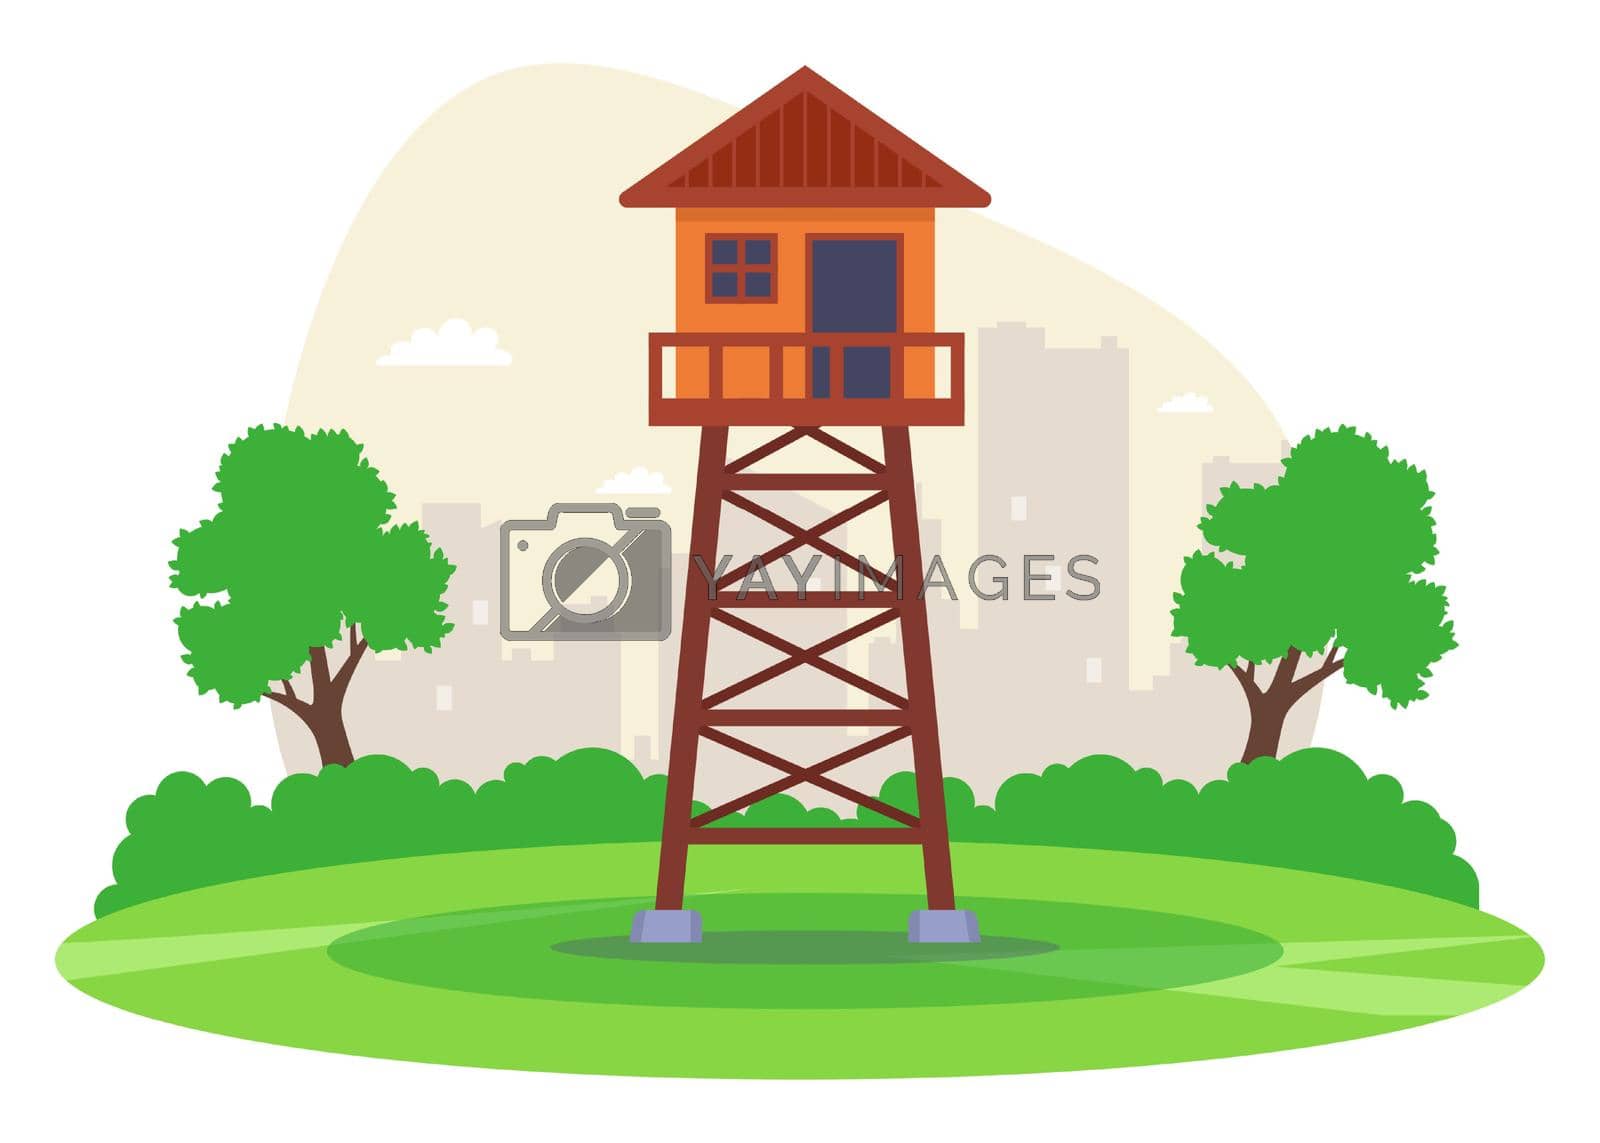 Royalty free image of observation tower on a green meadow to protect the territory. by PlutusART